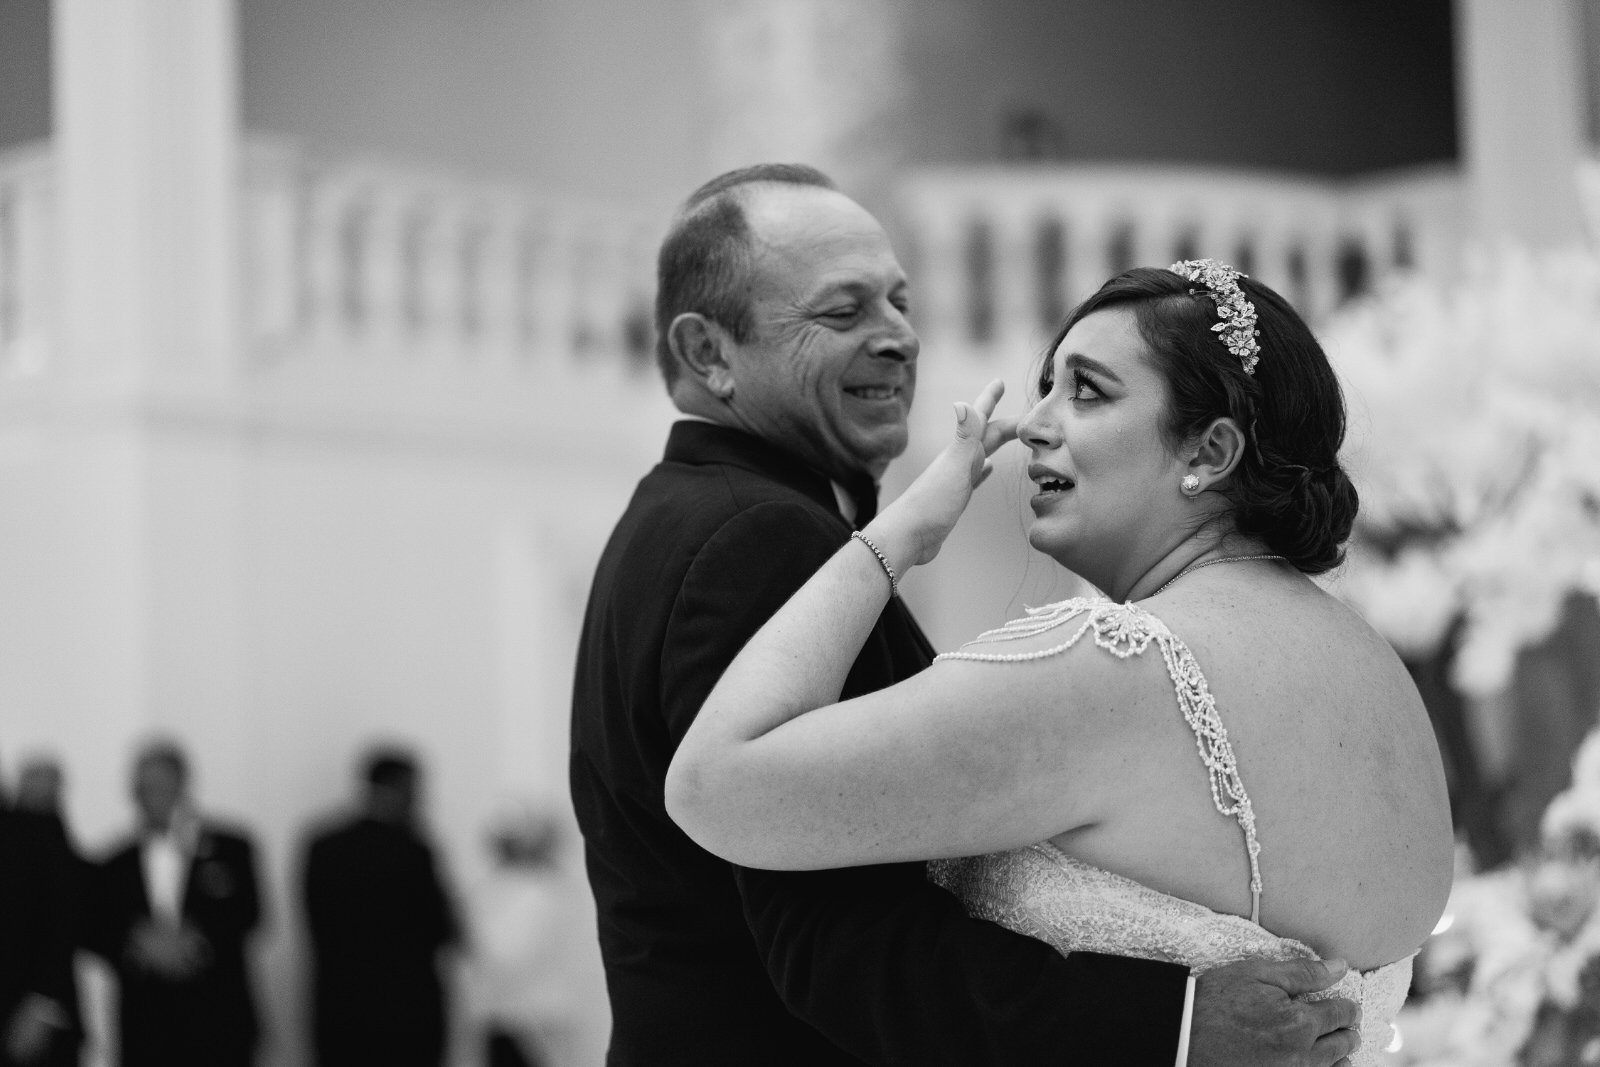 Emotional bride cries as she shares a first dance with her father at Antiguo Casino wedding in Puerto Rico